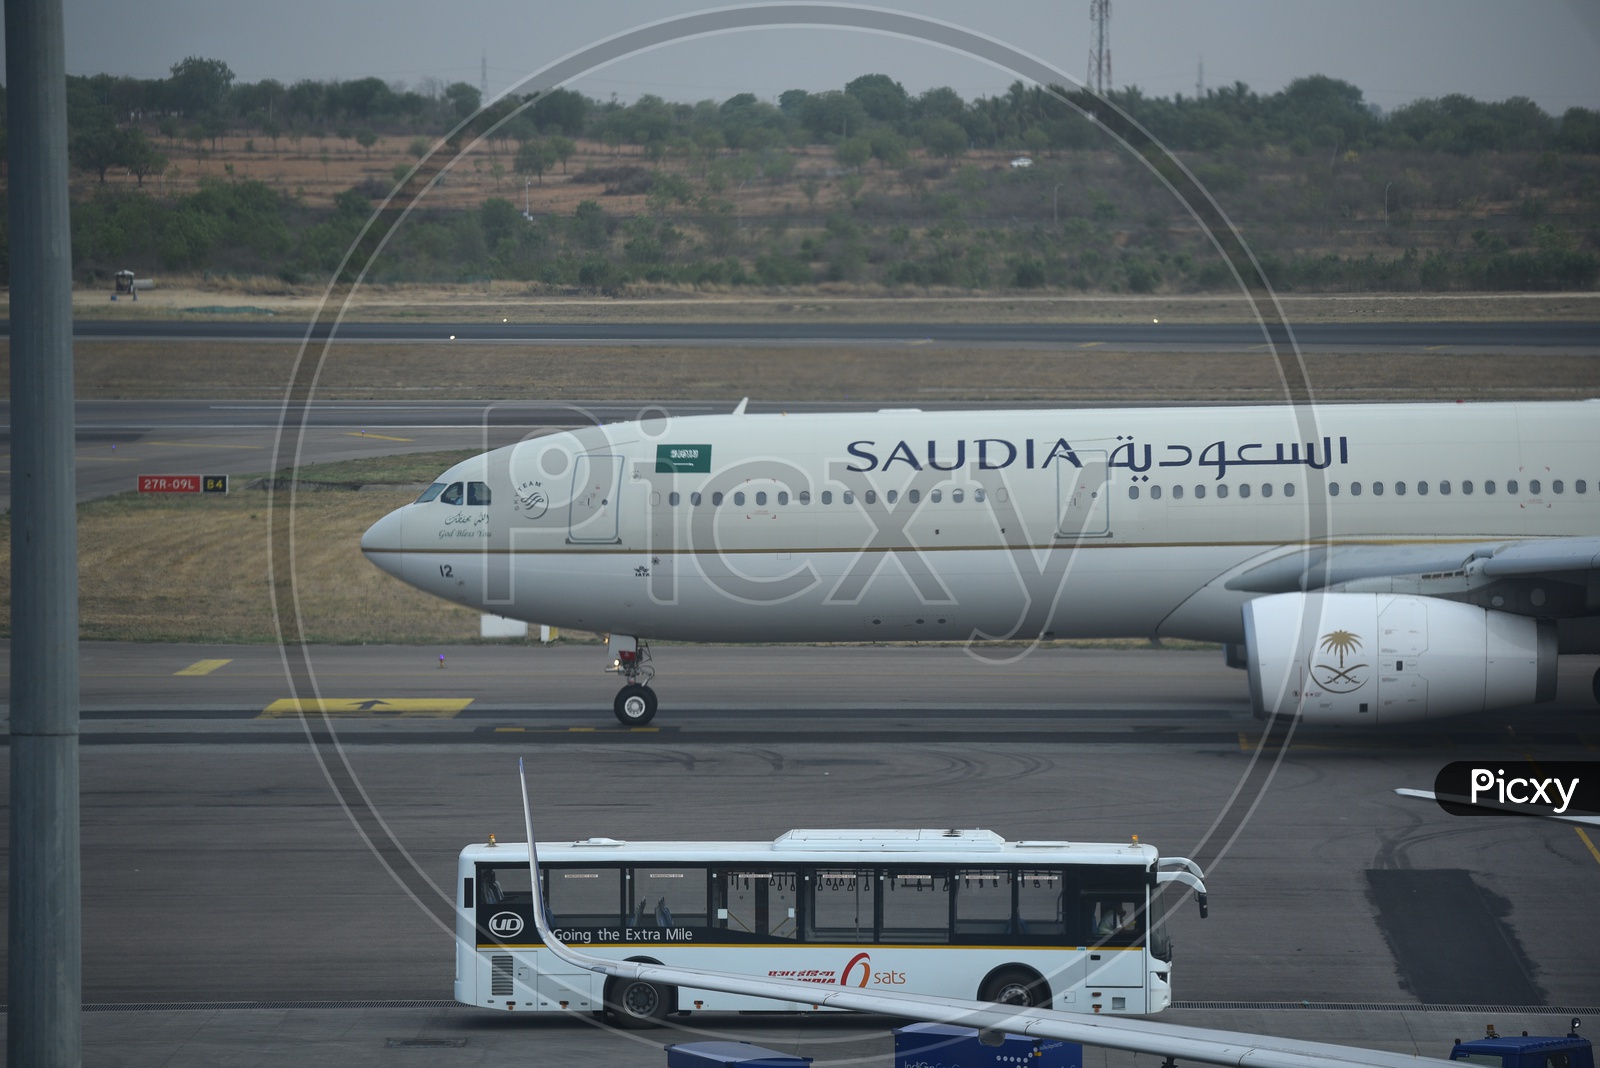 Saudia  Flight Parked In an Airport